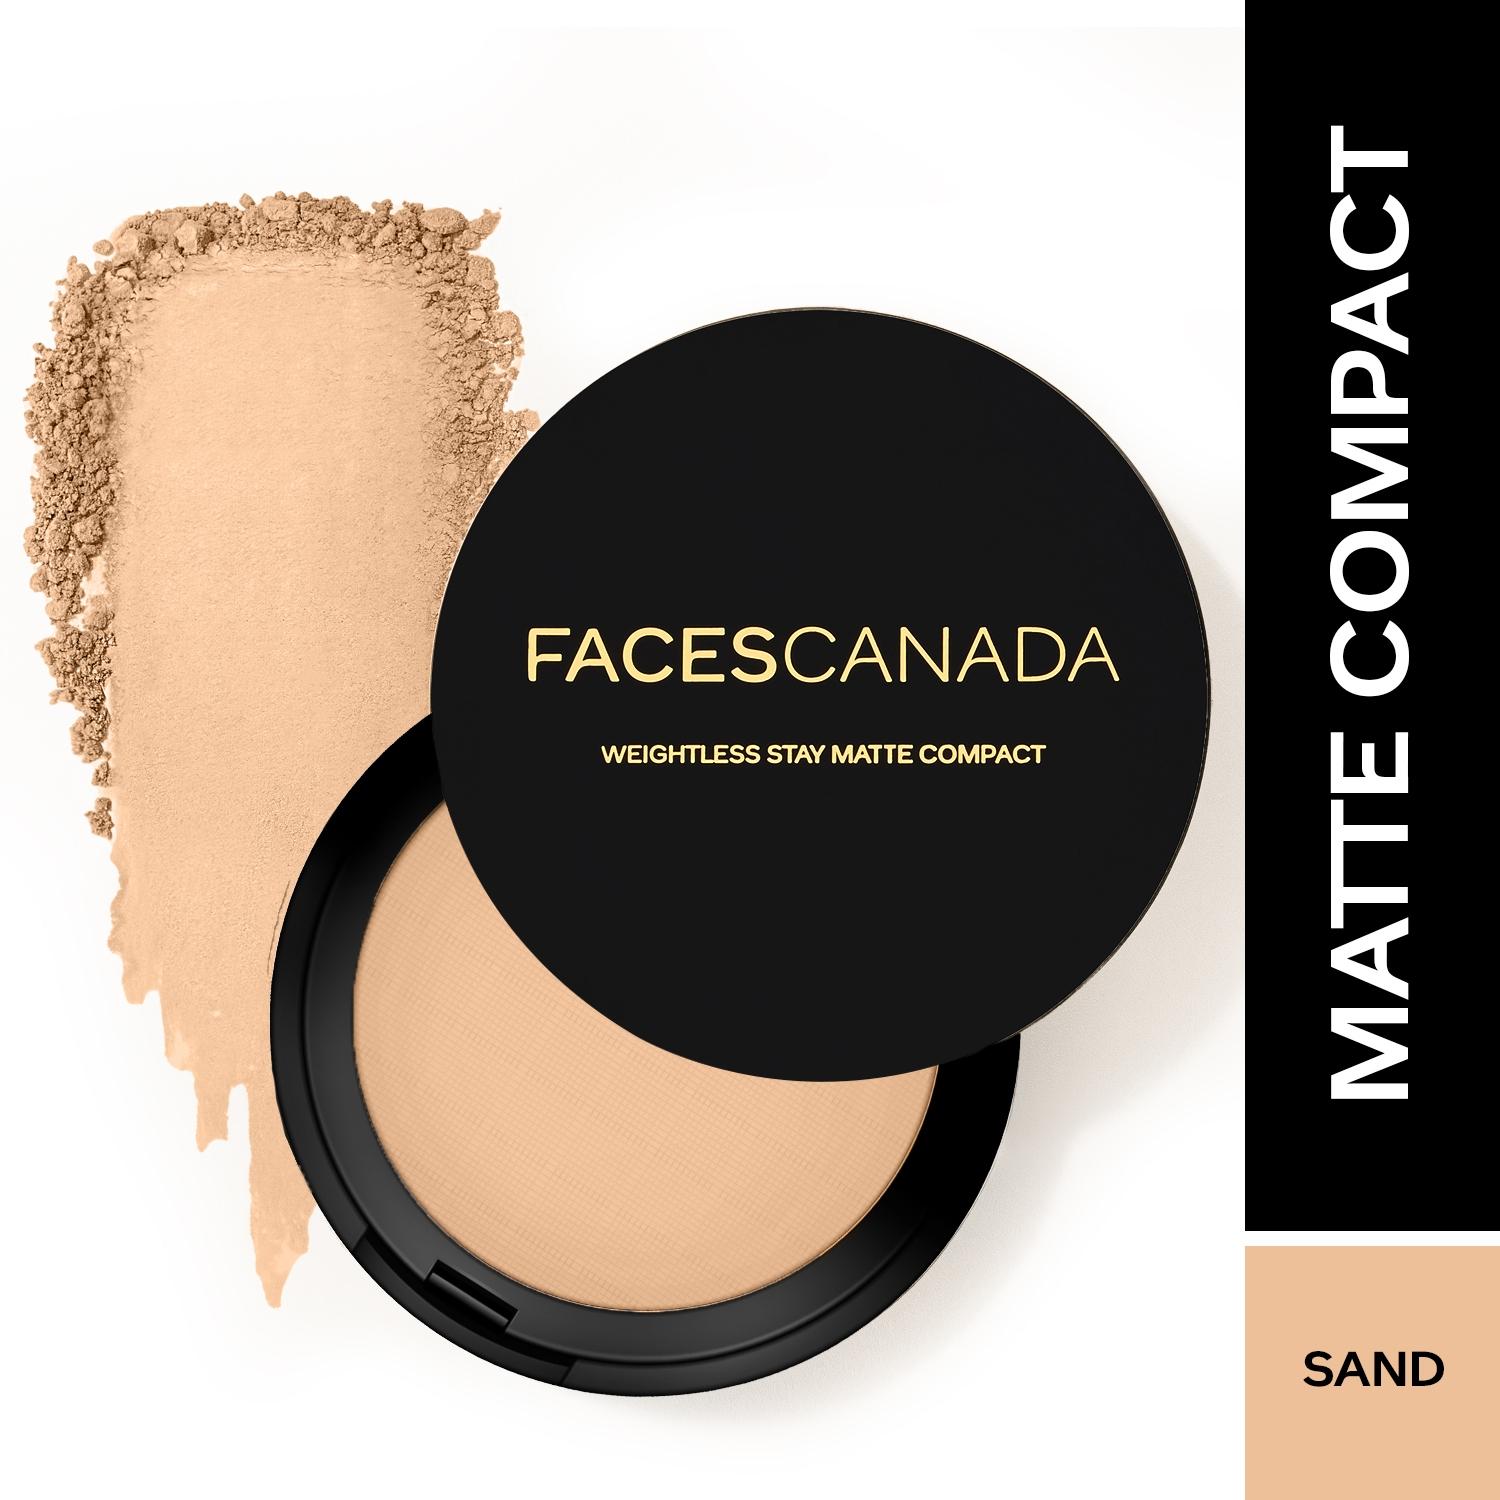 faces canada weightless stay matte compact spf 20 - 04 sand (9g)